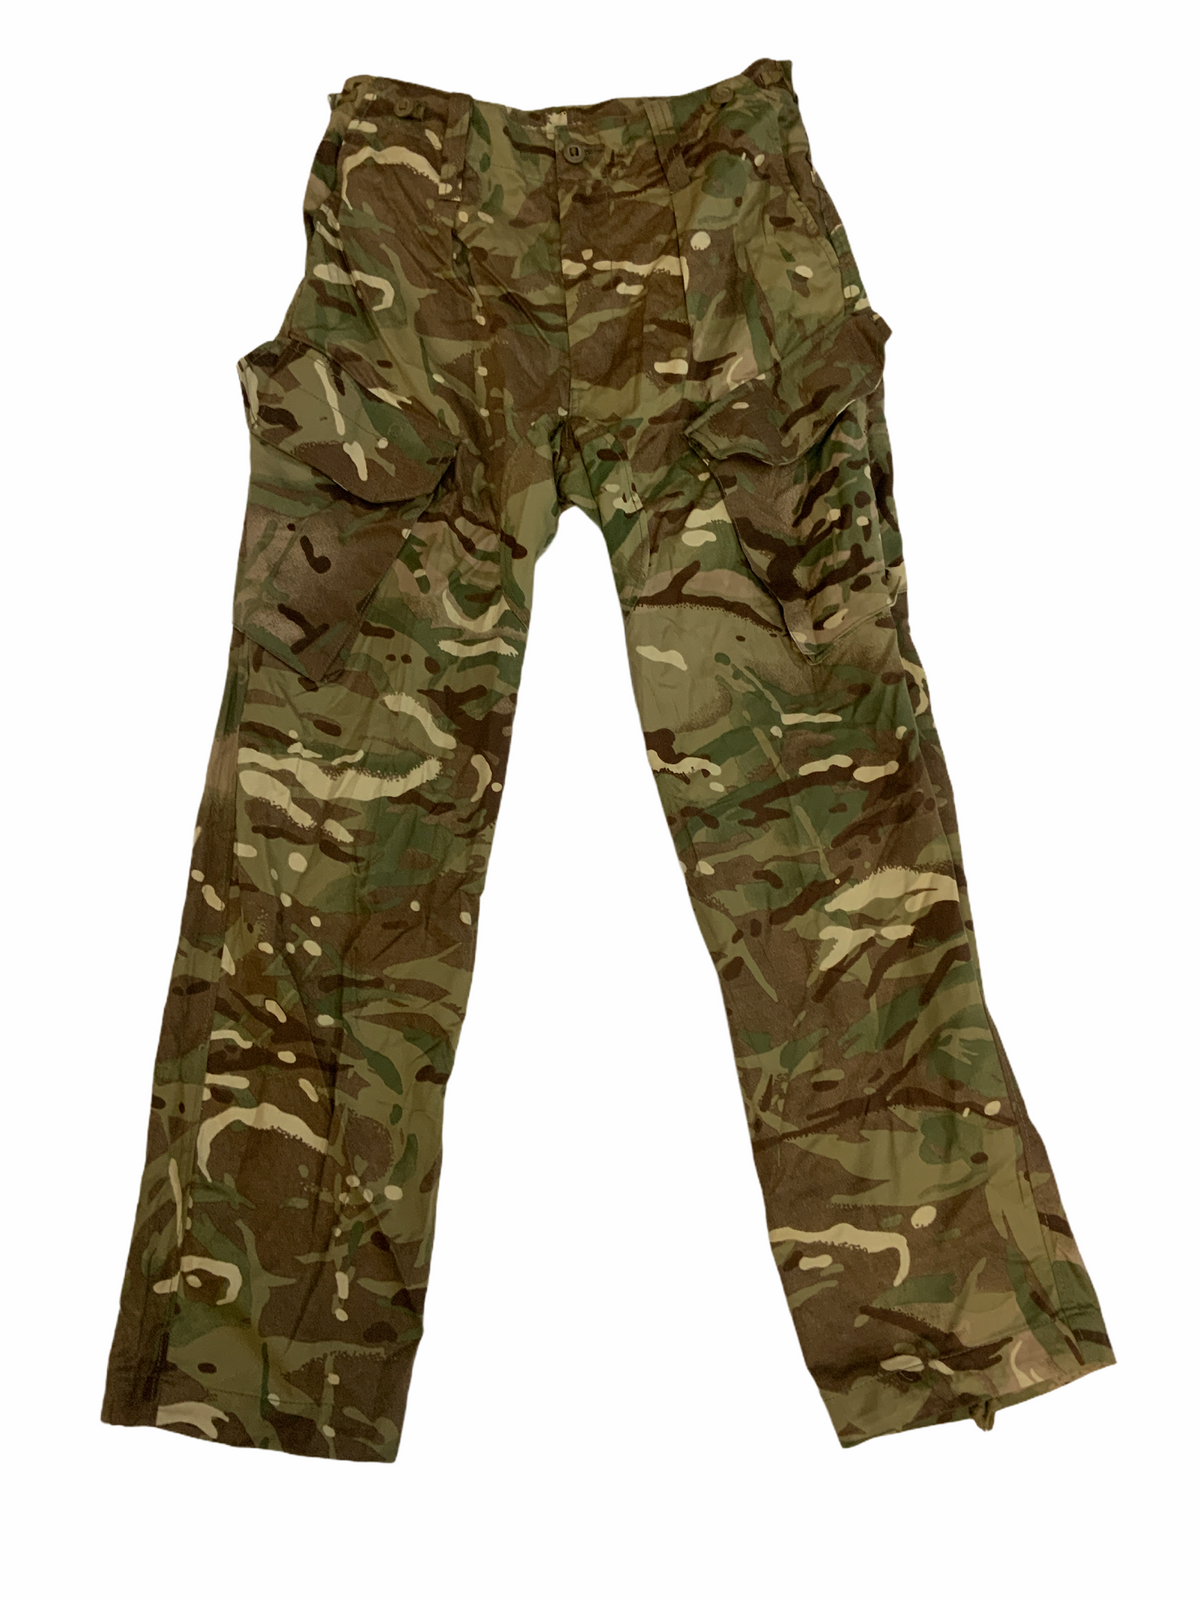 British Army Issue MTP PCS Combat Trousers New